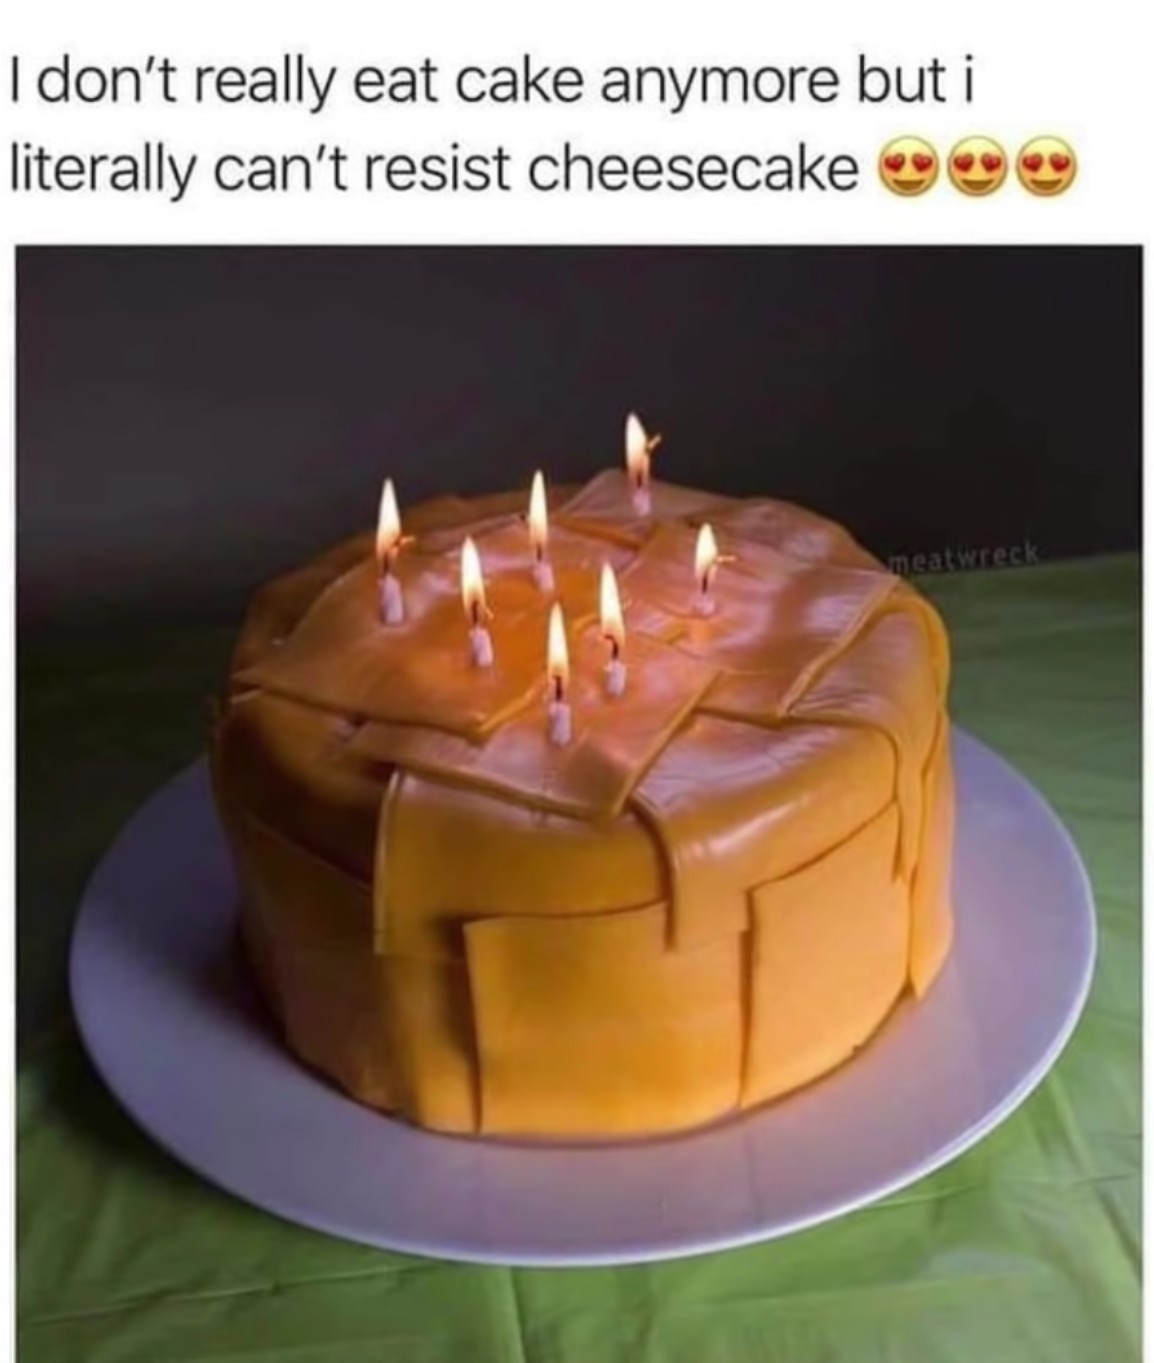 Imagine getting a cake for your birthday made of Kraft Singles. - meme